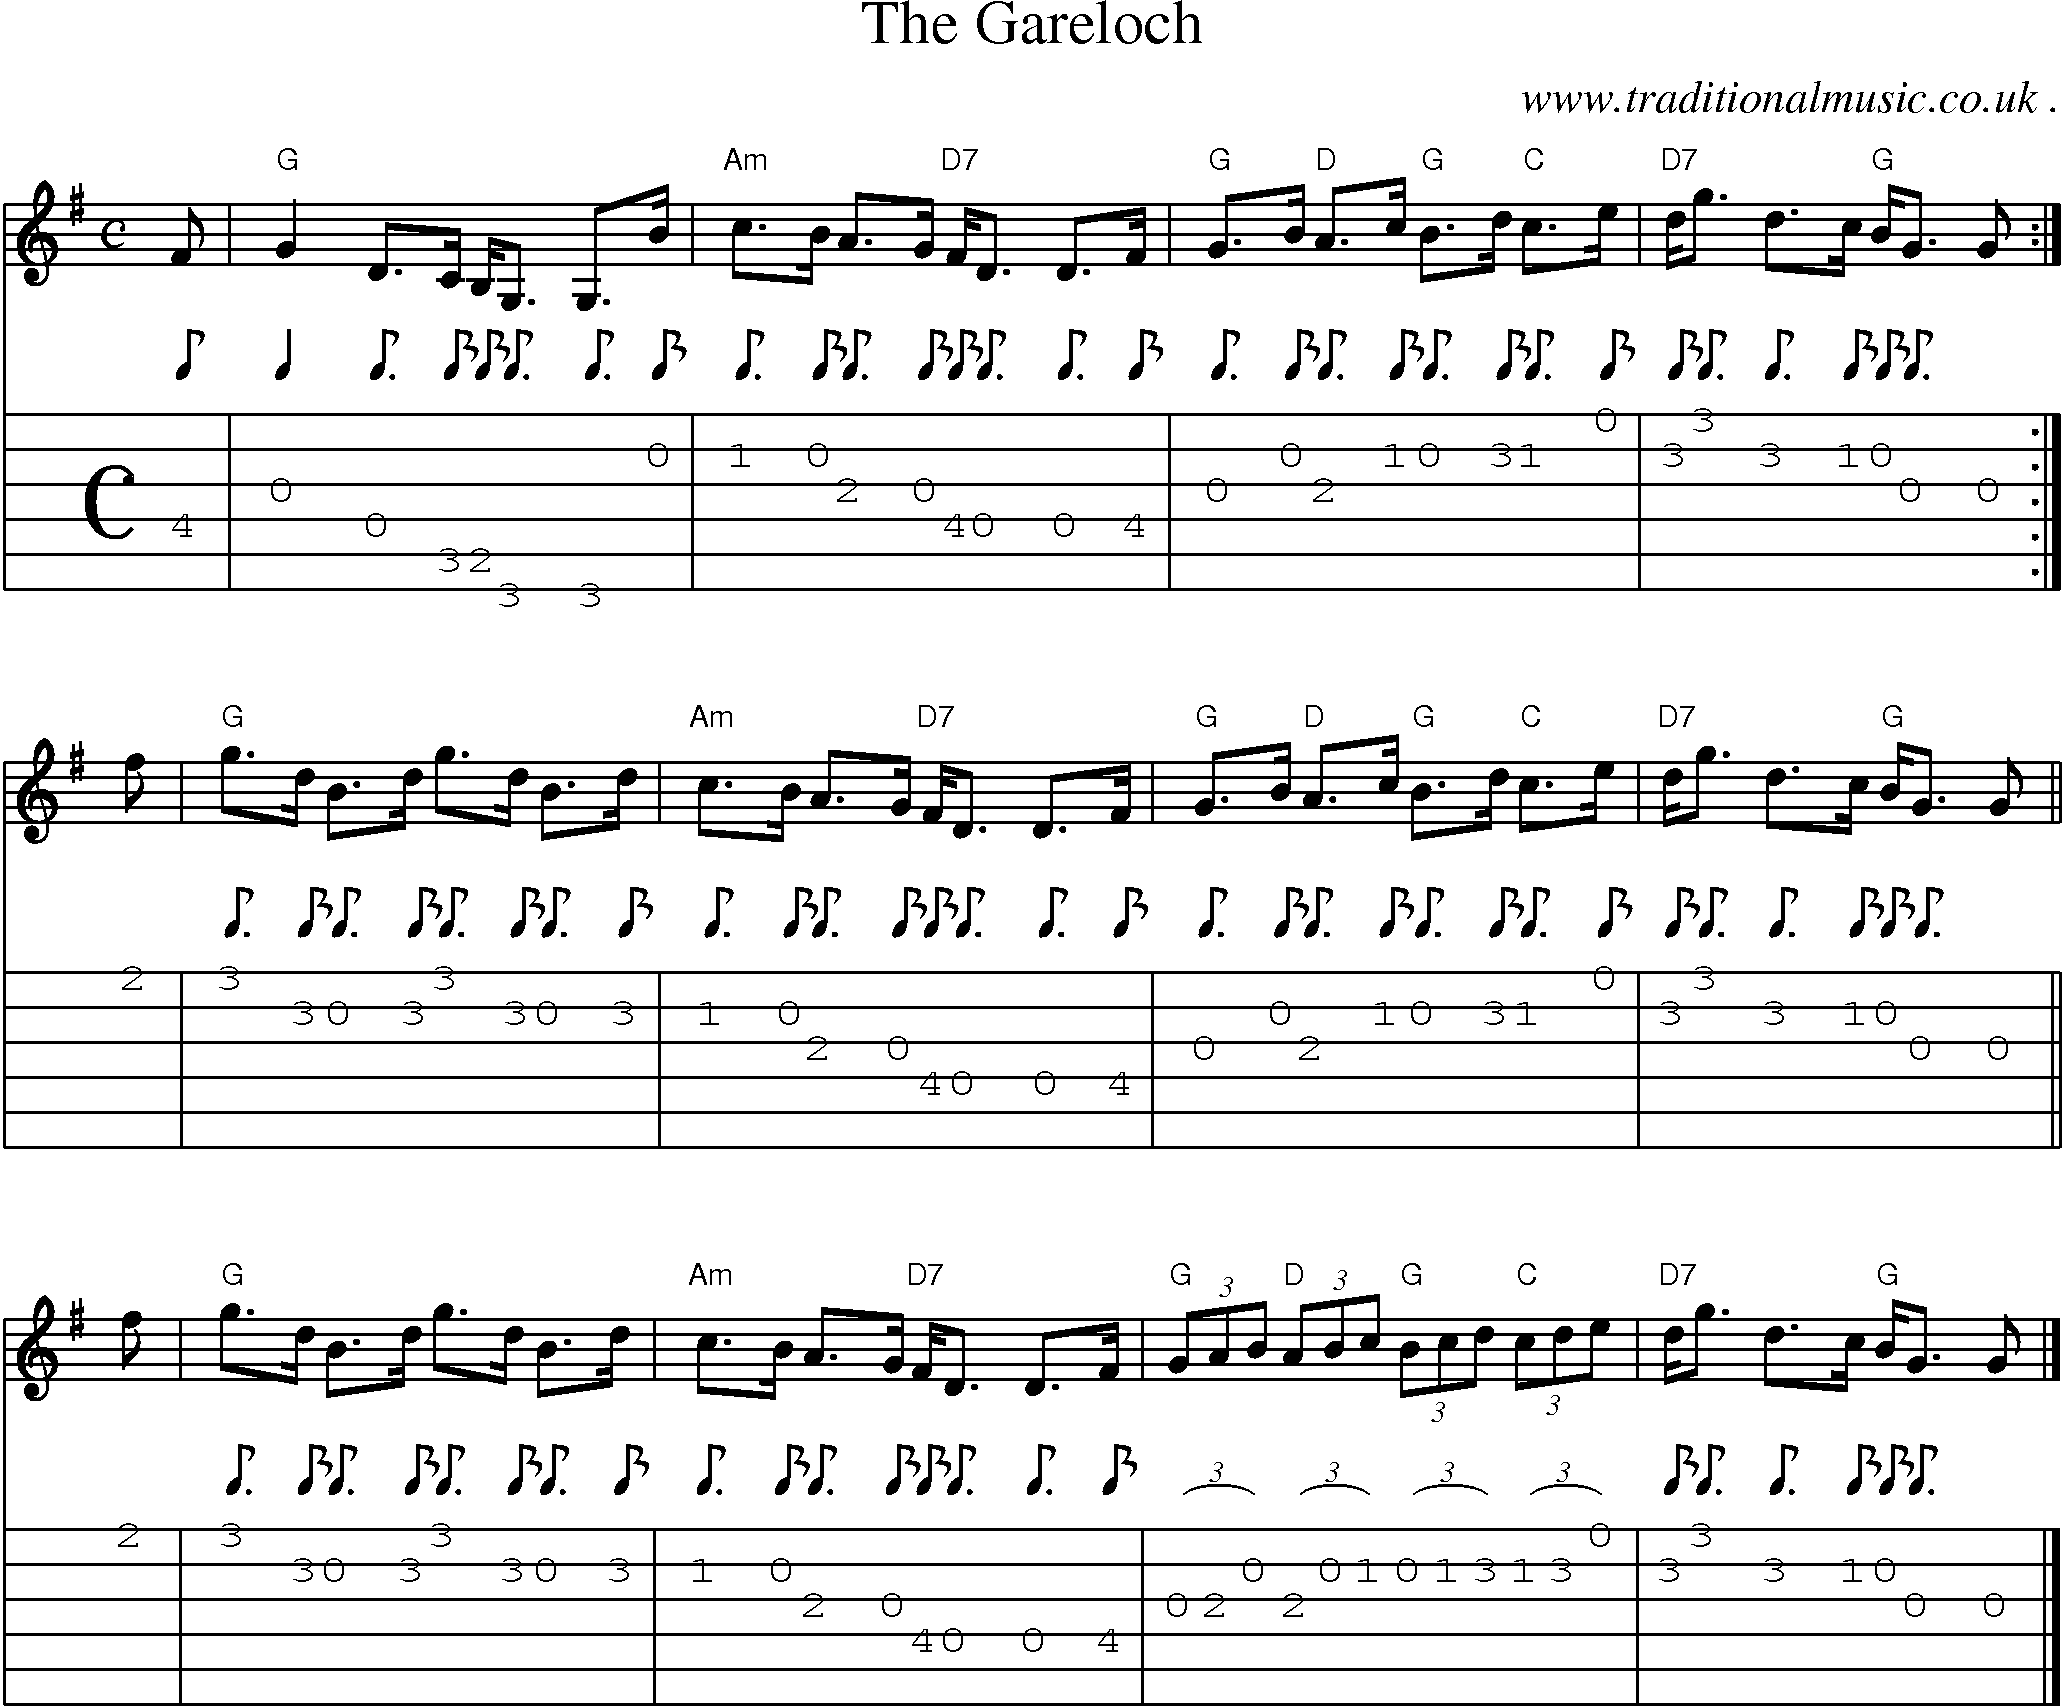 Sheet-music  score, Chords and Guitar Tabs for The Gareloch